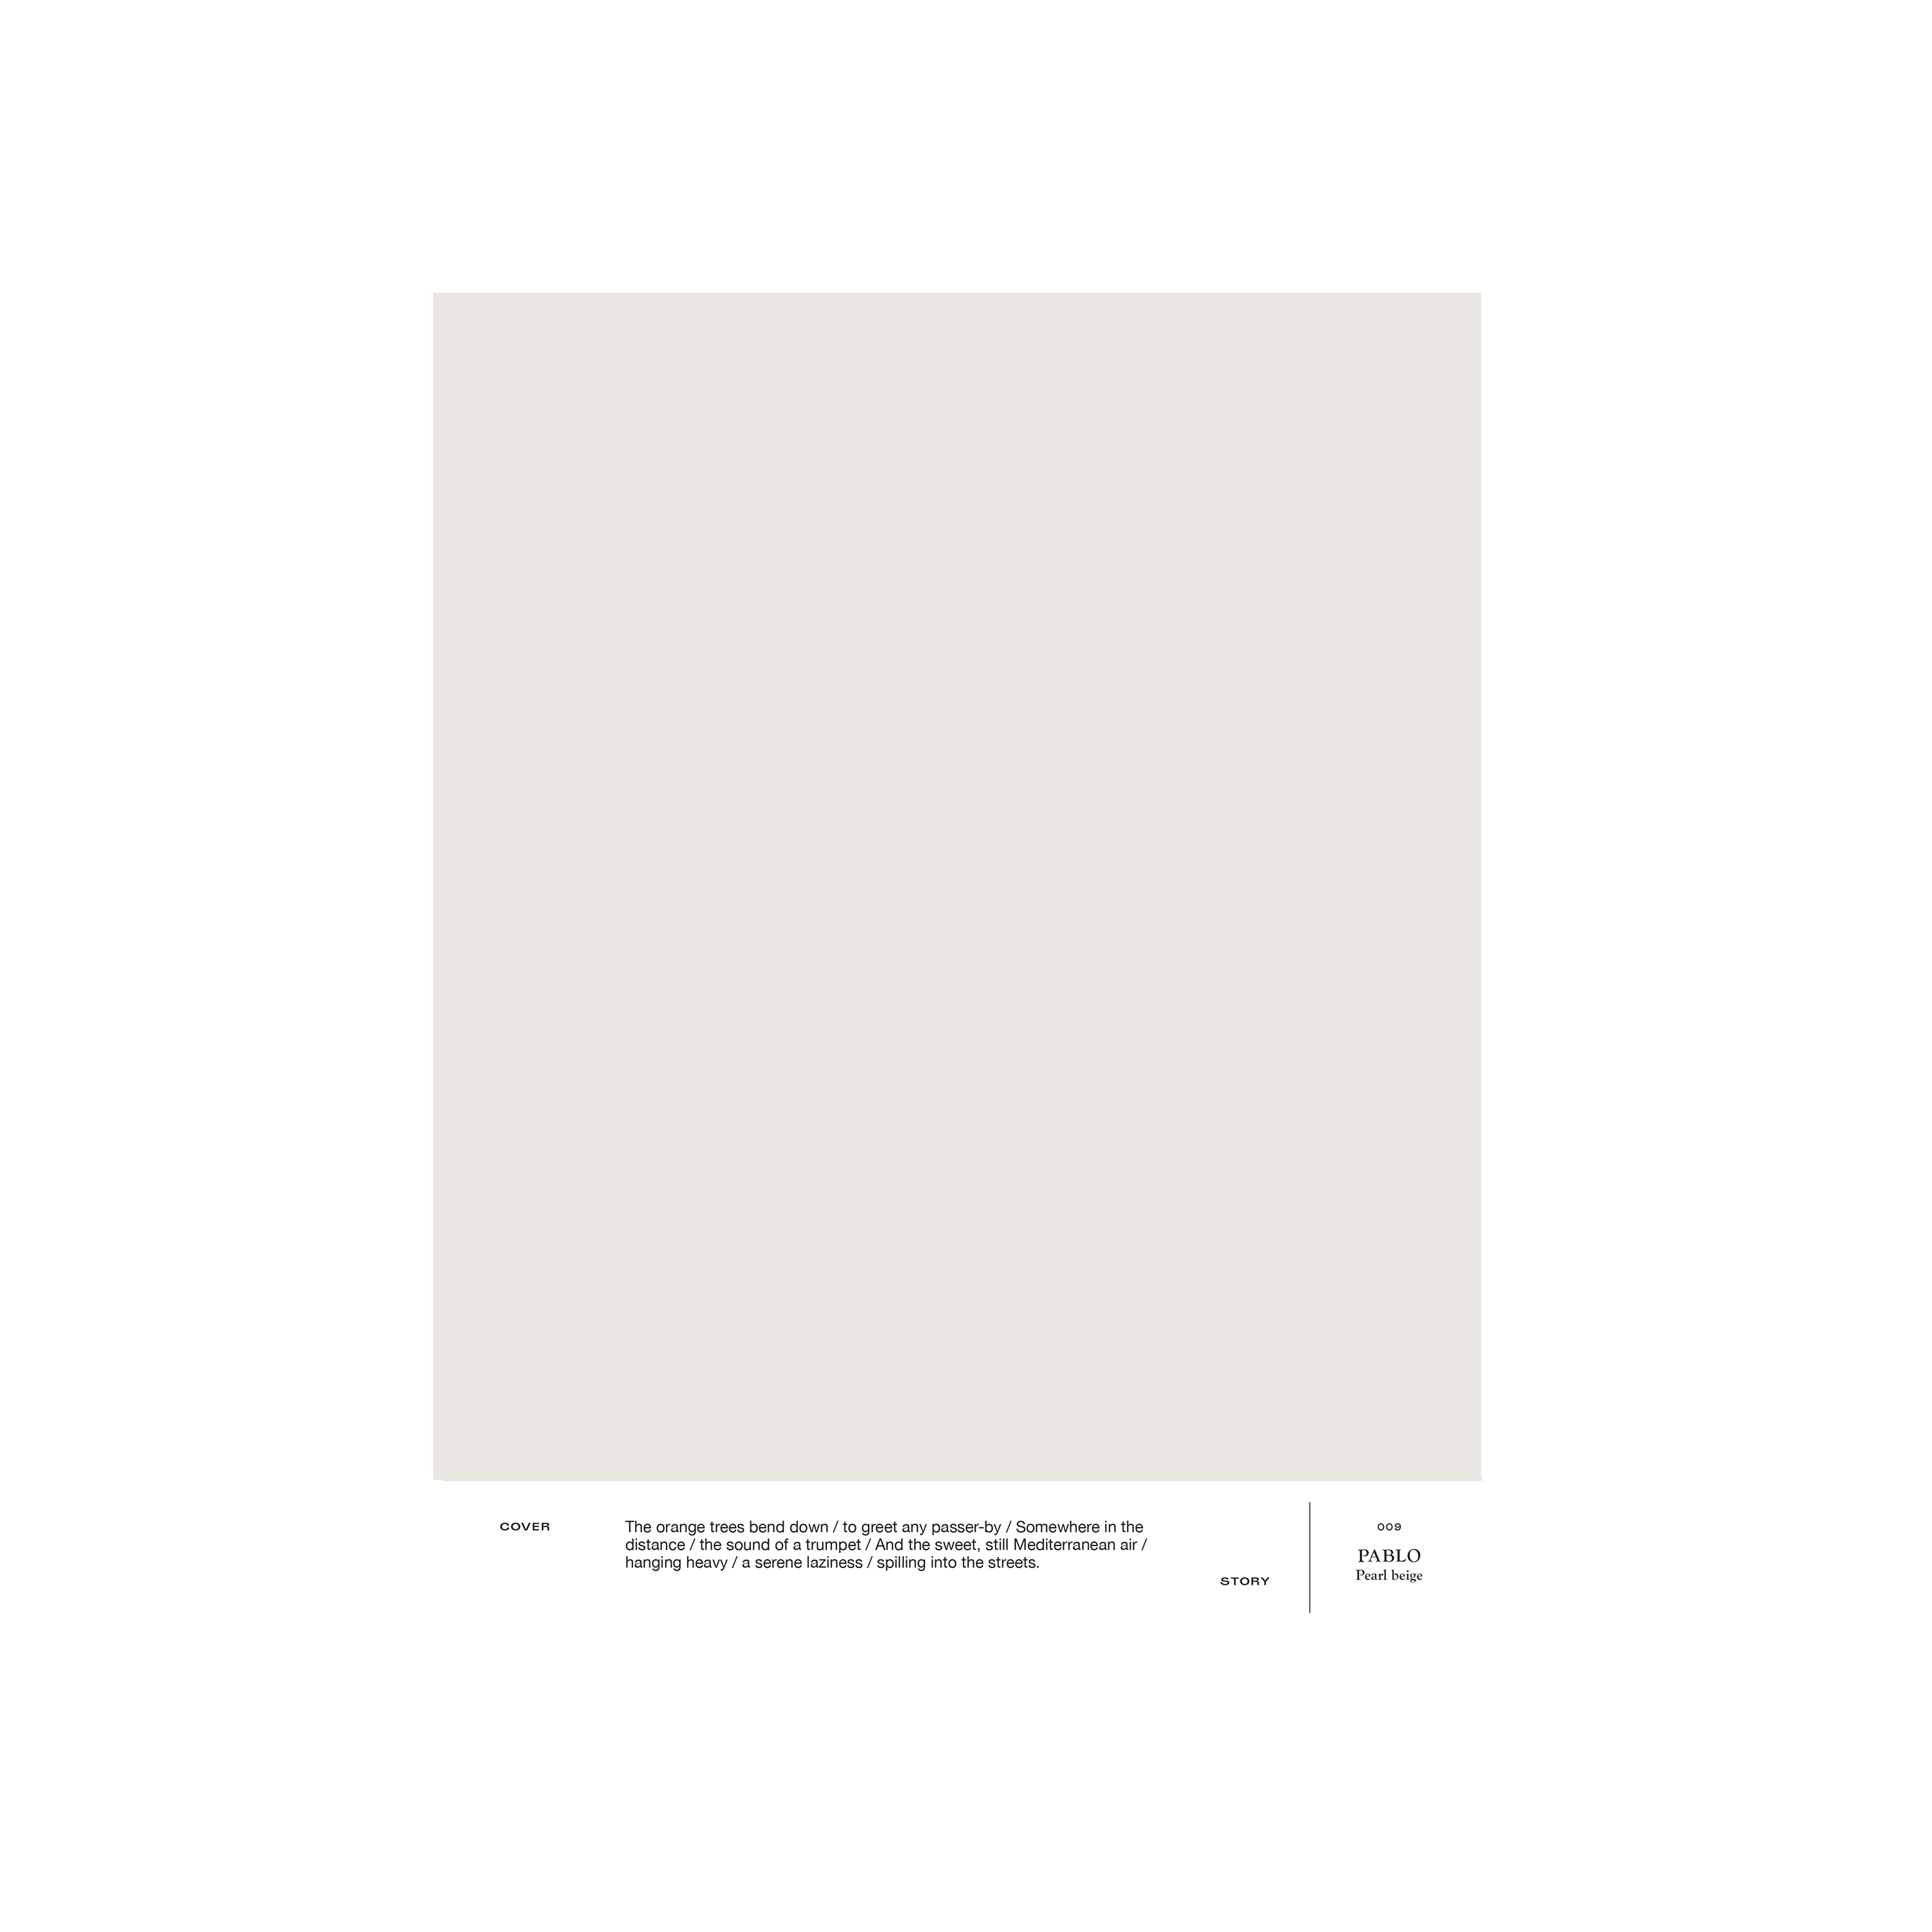 Pearl beige interior paint Cover Story 009 PABLO